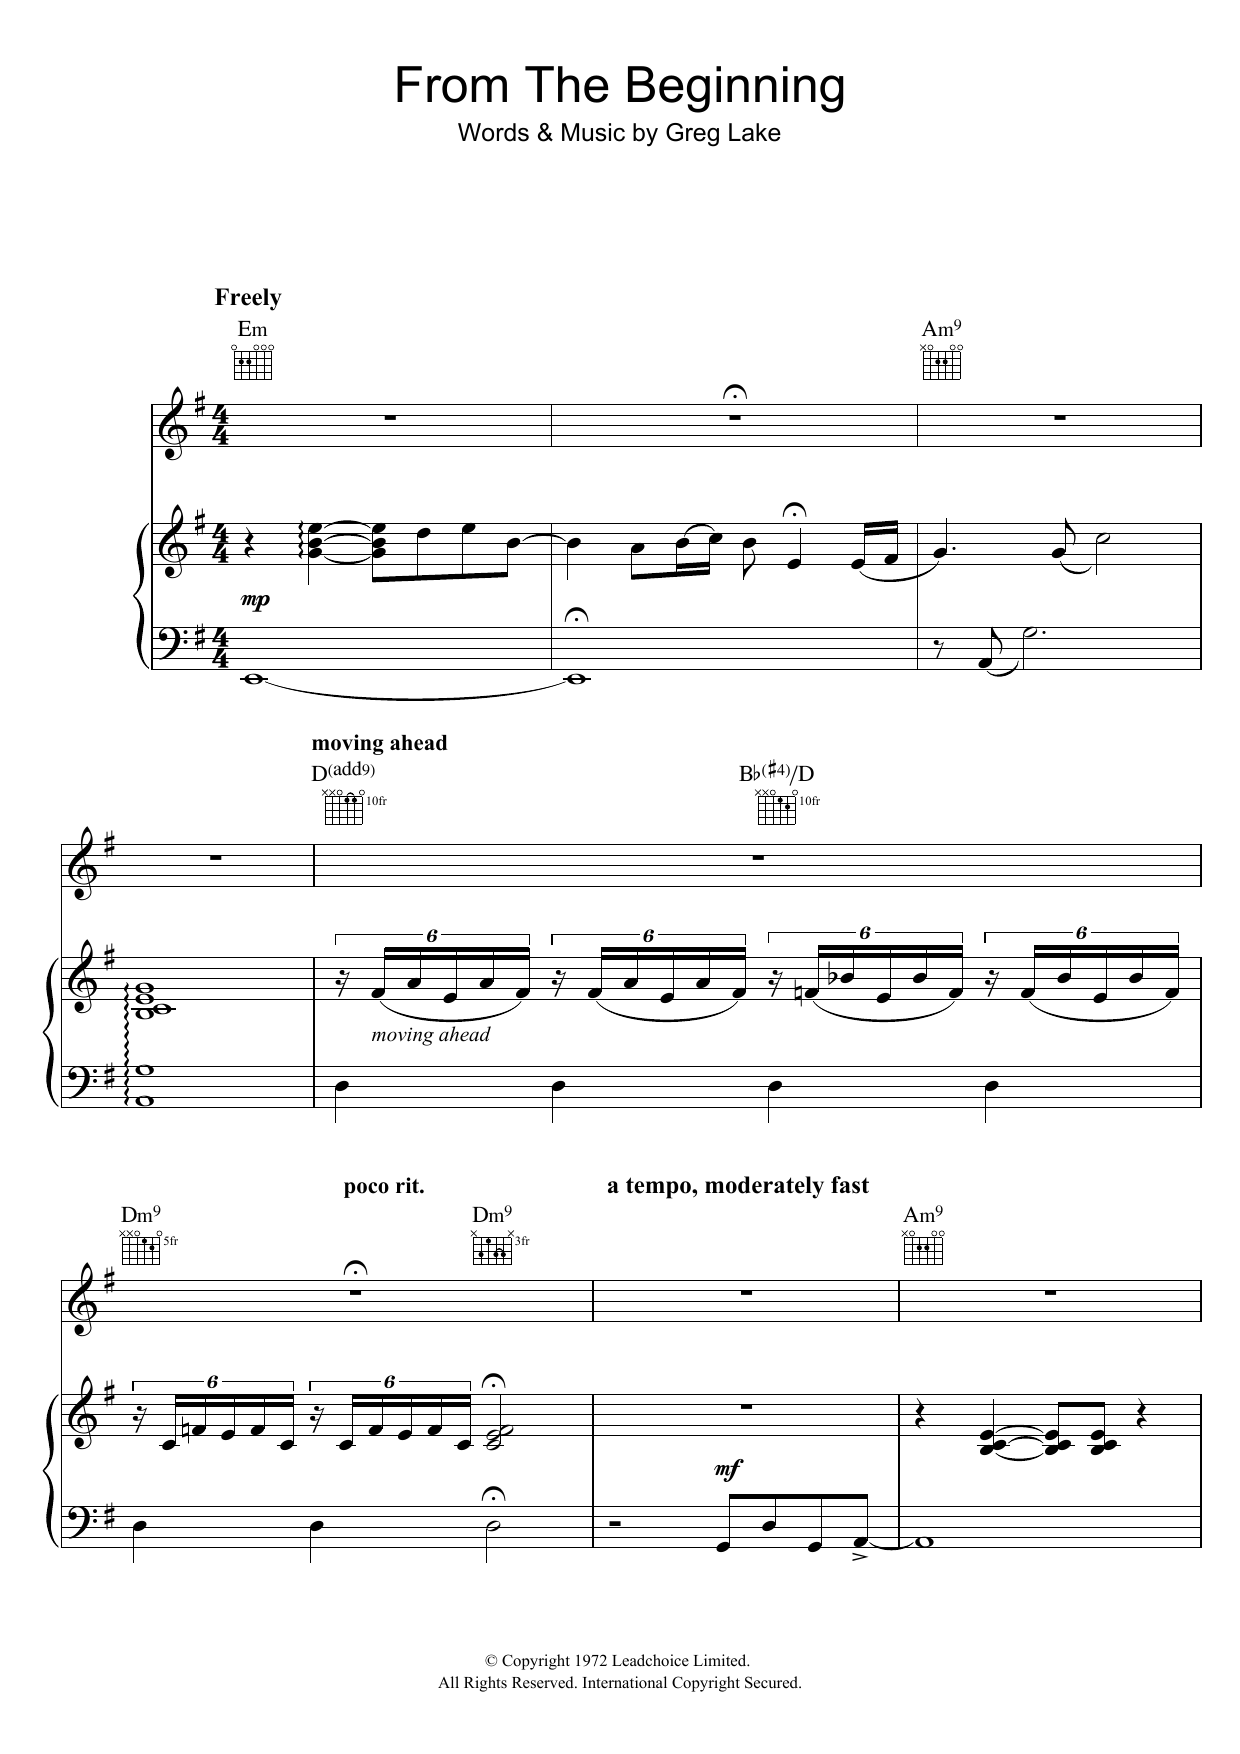 Download Emerson, Lake & Palmer From The Beginning Sheet Music